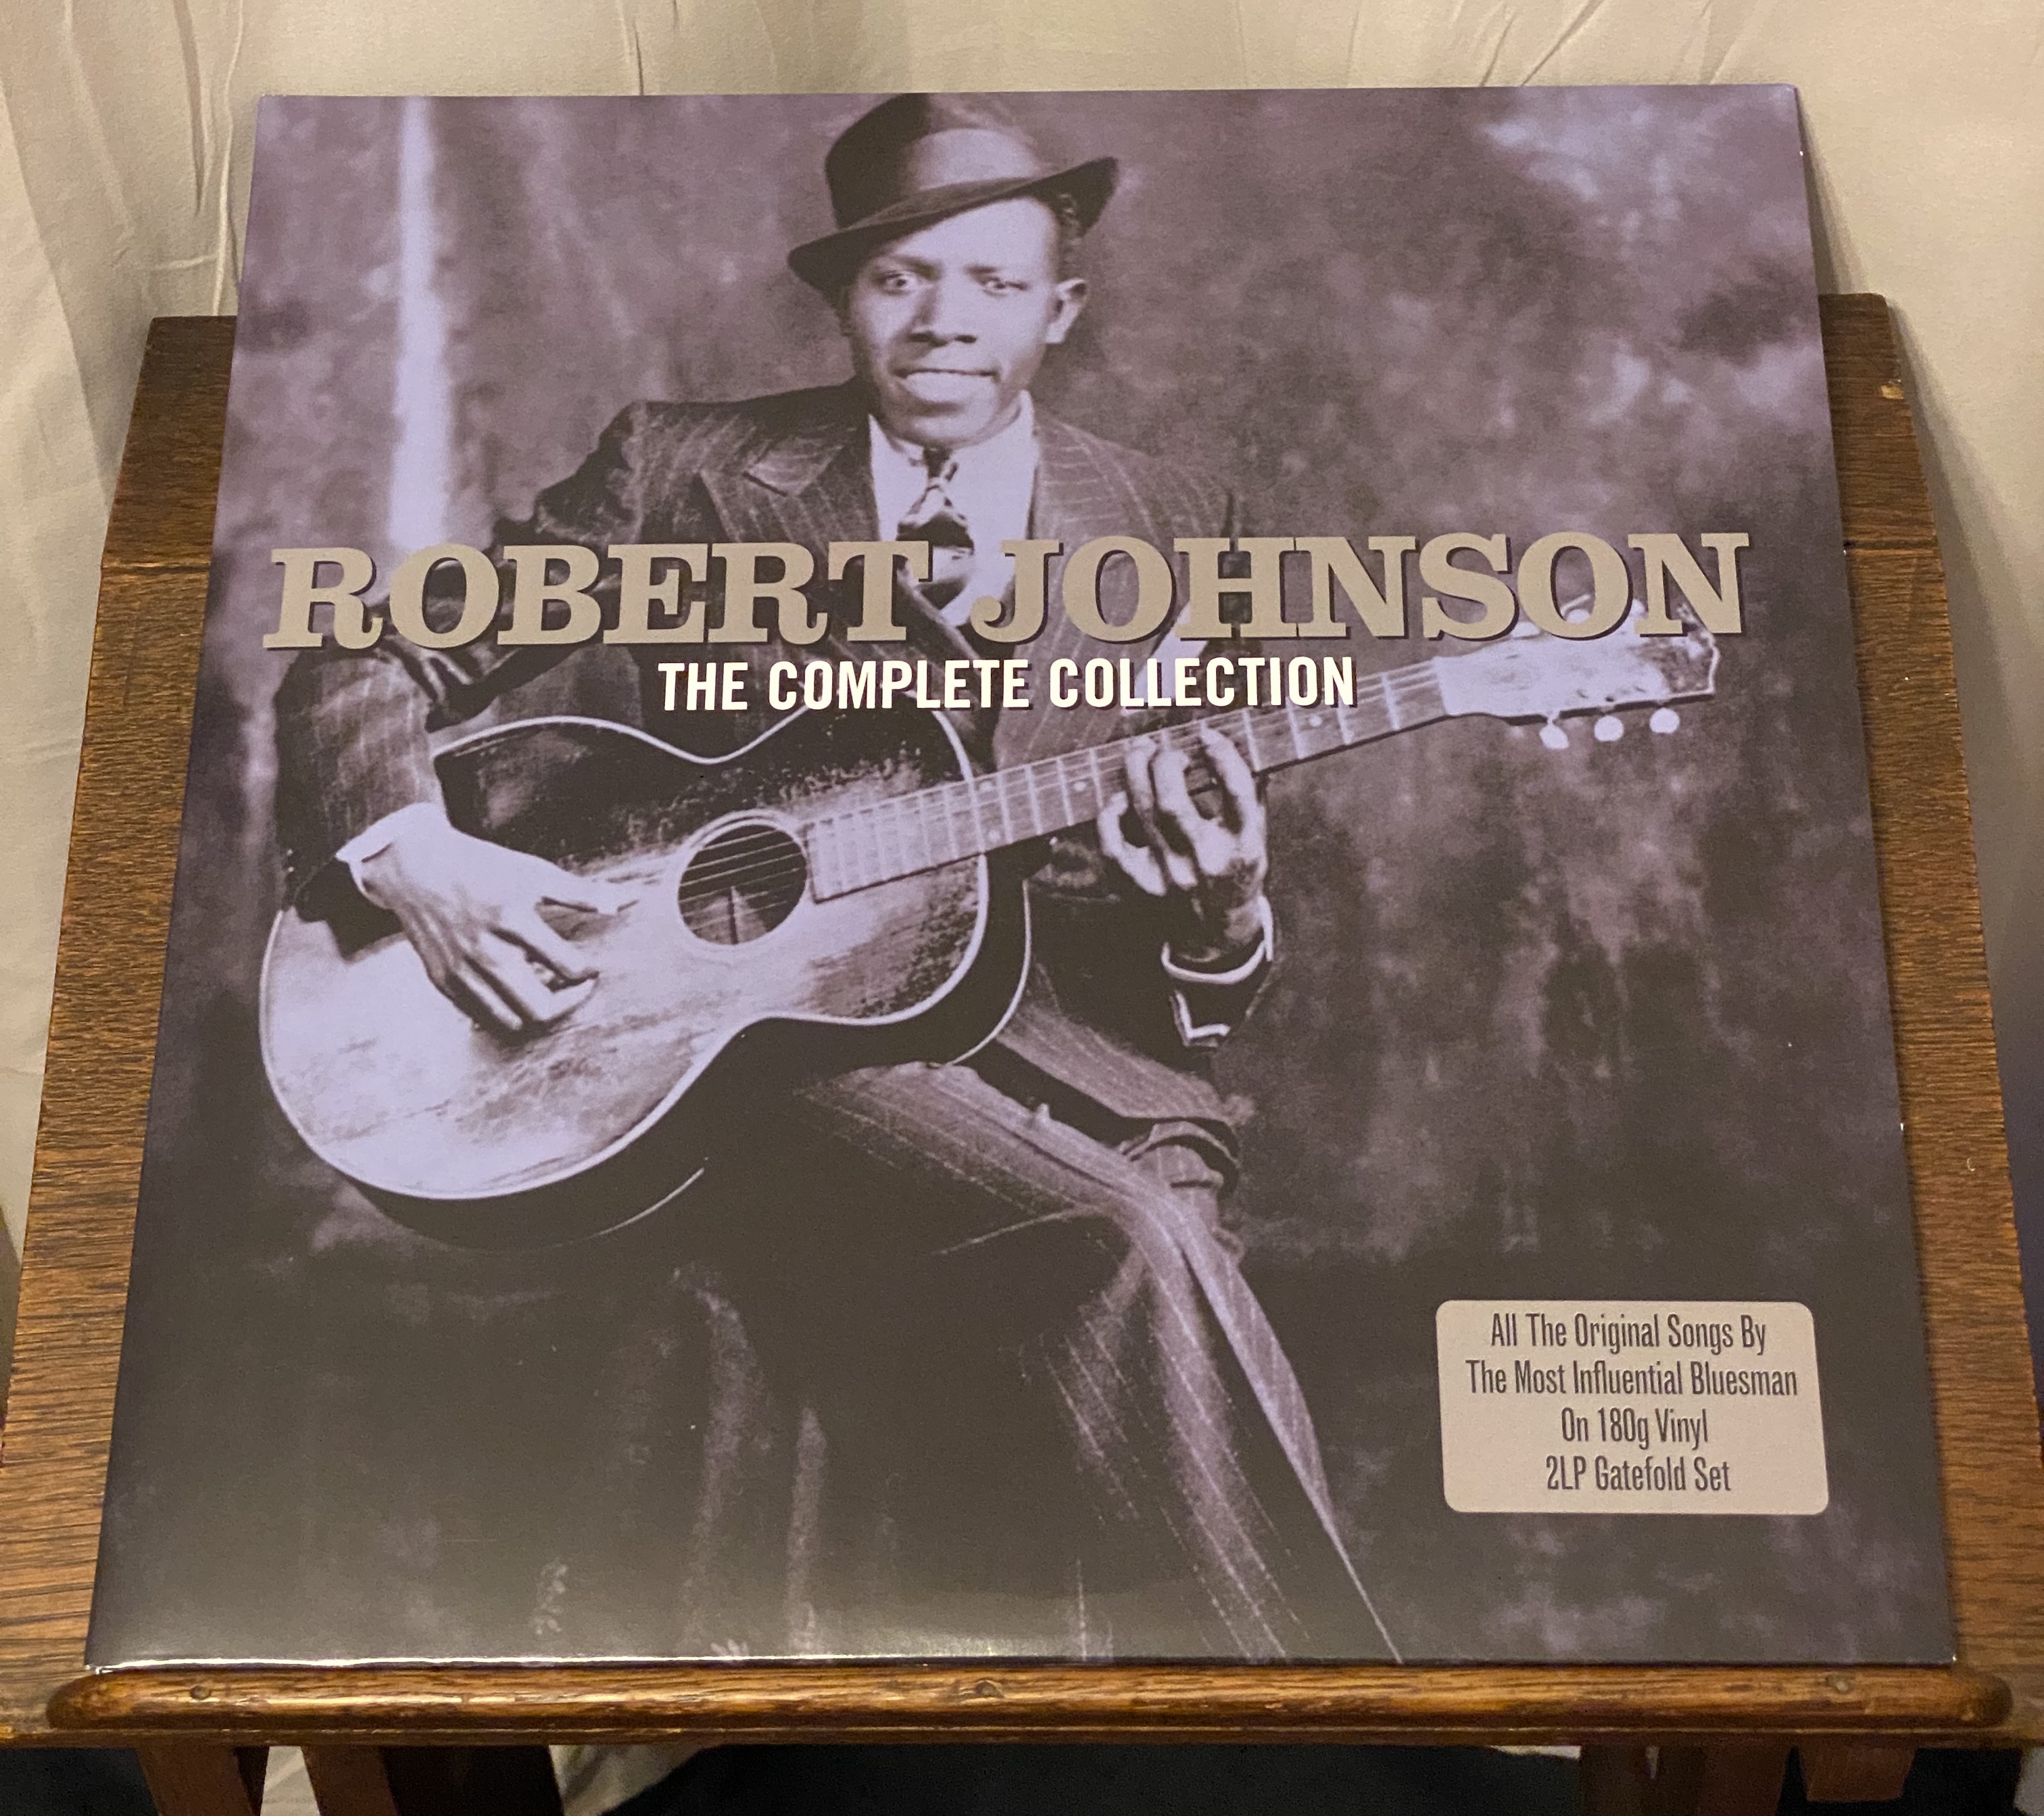 Tom Waites Vinyl LP. Robert Johnson Vinyl LP. Both In Excellent NM Condition. Only Played Once. - Image 7 of 16